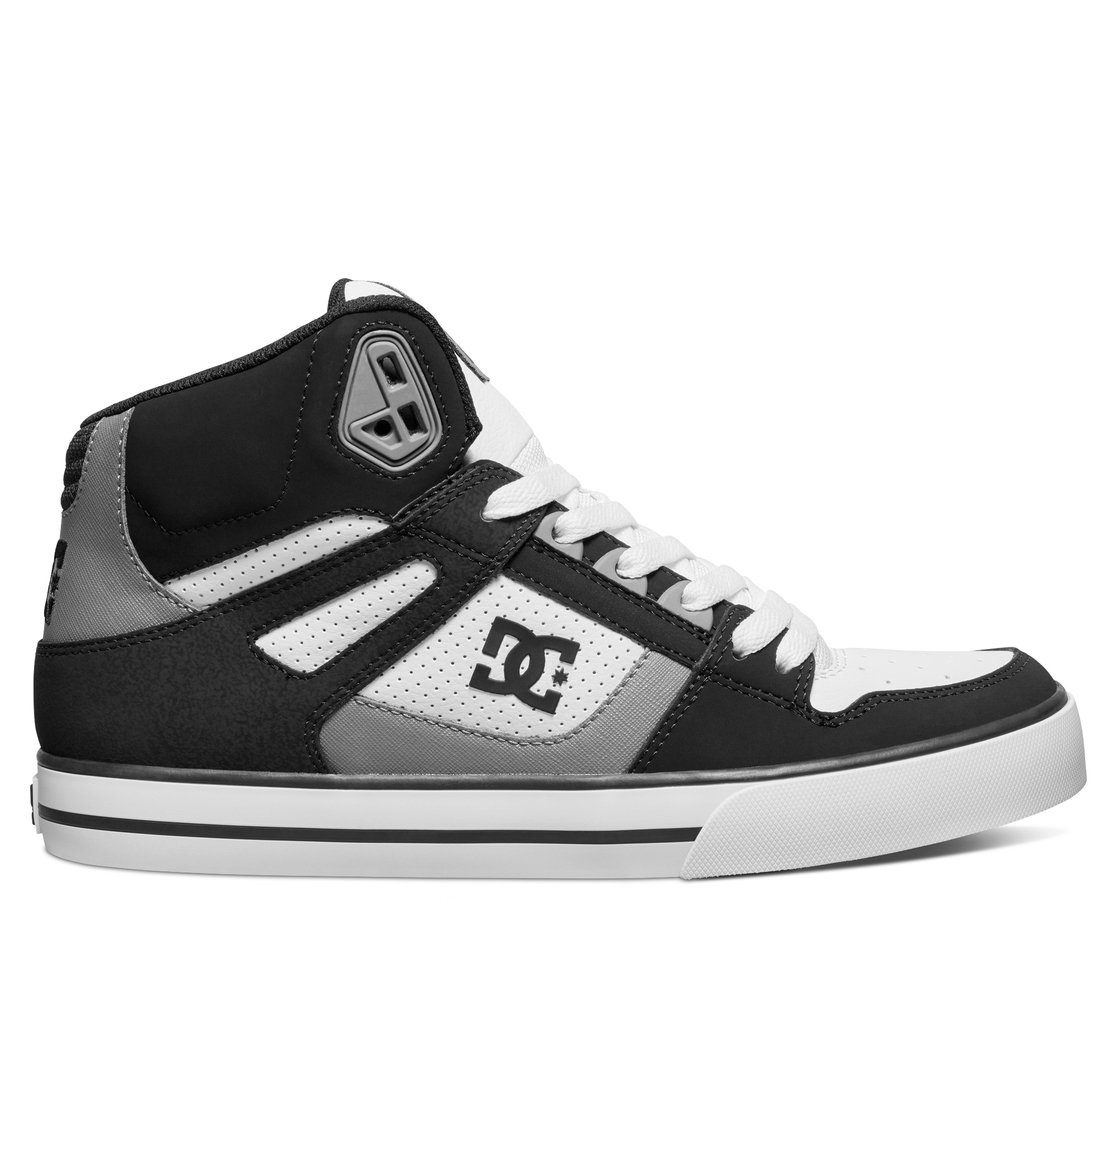 DC Shoes™ Spartan High WC - High-Top Shoes for Men 302523 | eBay